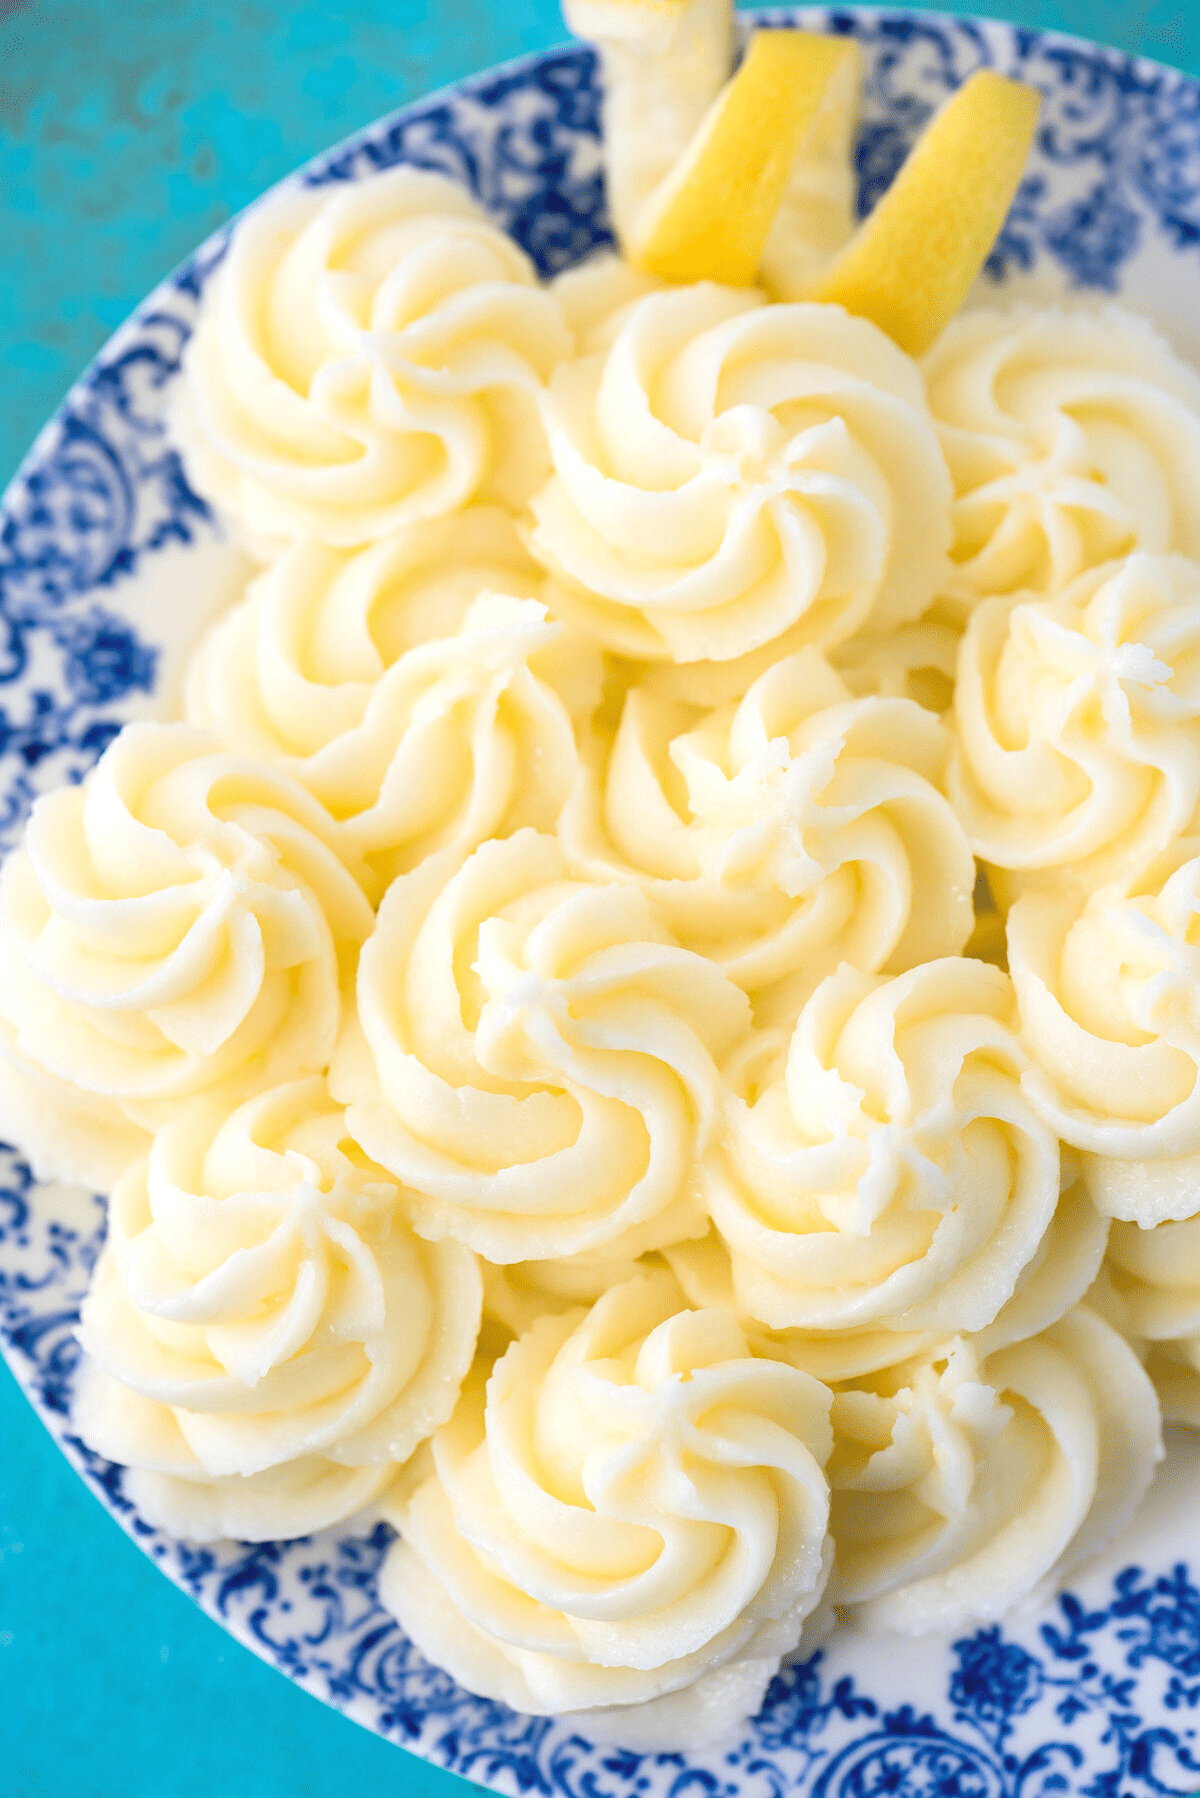 lemon frosting swirled piped onto blue floral plate